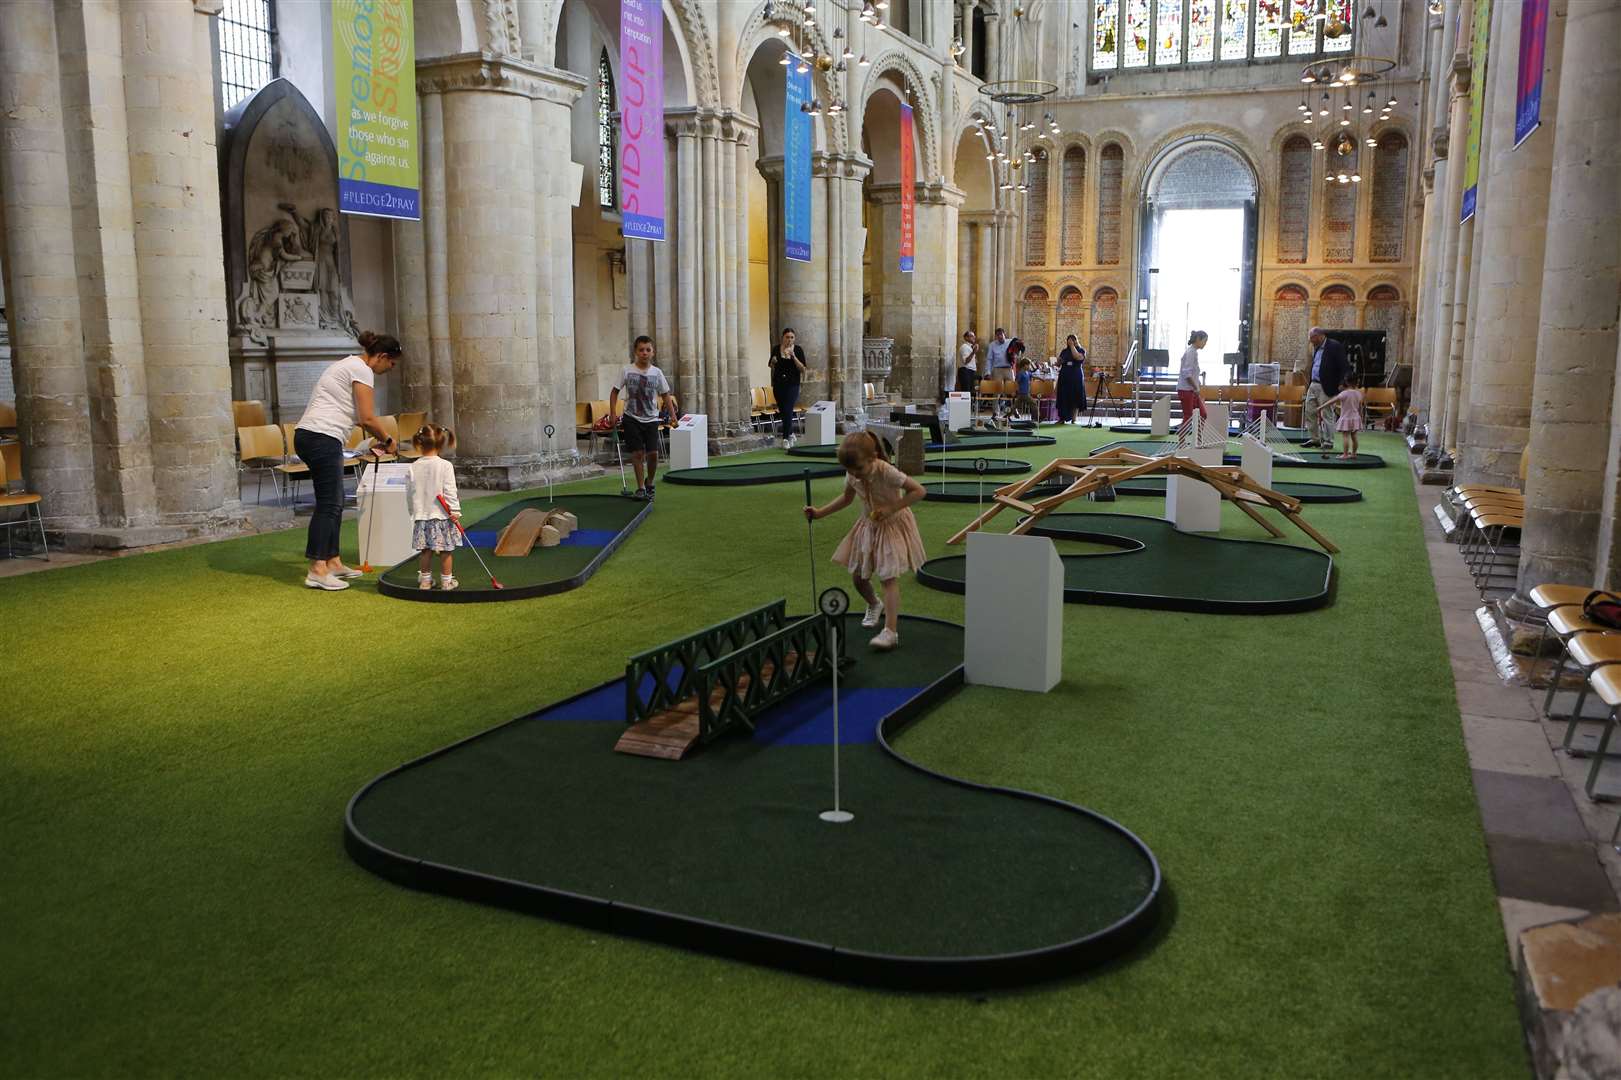 A crazy golf course opened inside Rochester Cathedral in 2019